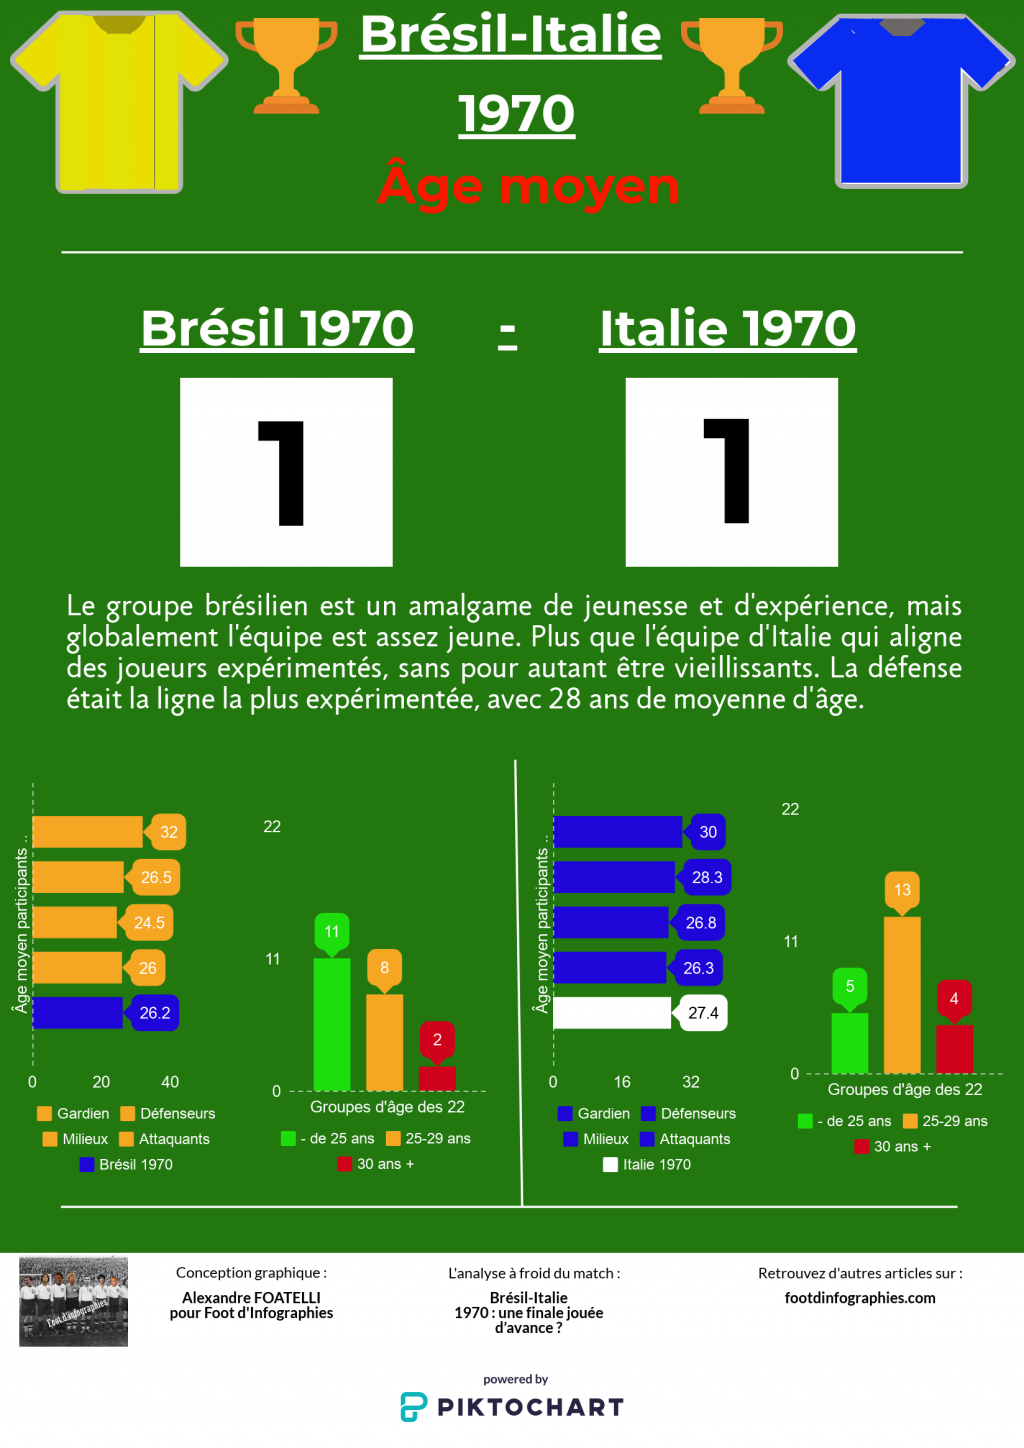 replay-game-bresil-italie-1970-âge-moyen-foot-dinfographies